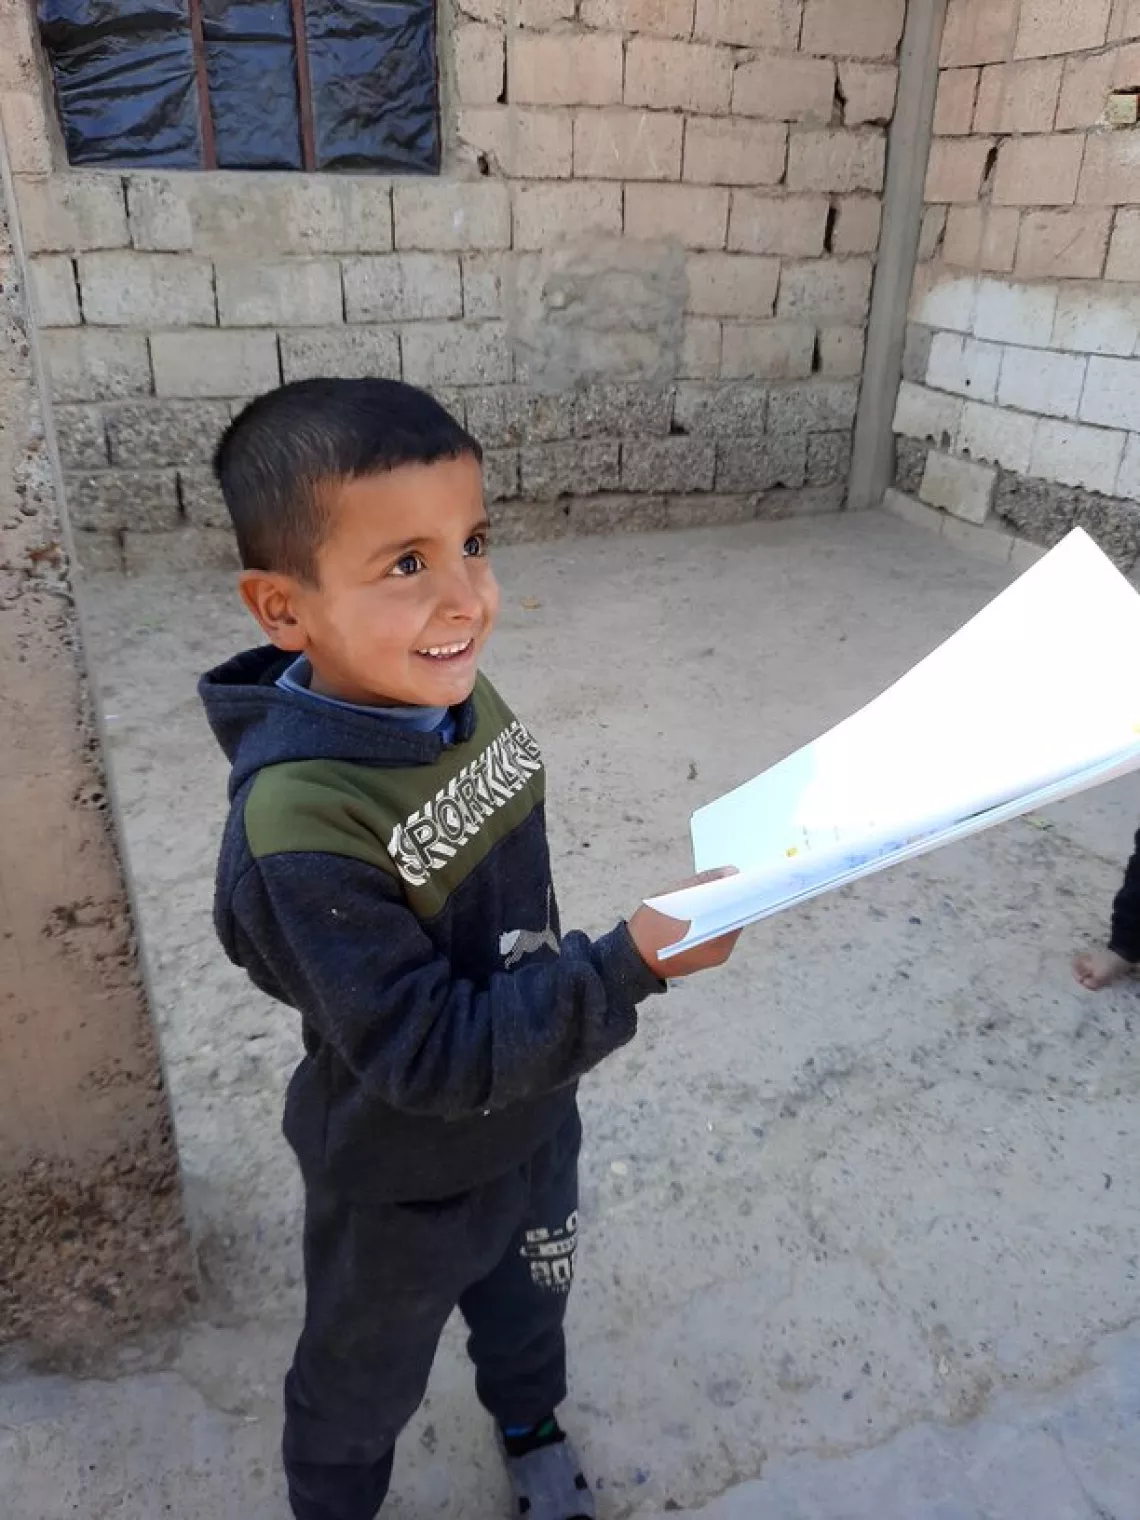 A young boy is smiling and handling papers, outside